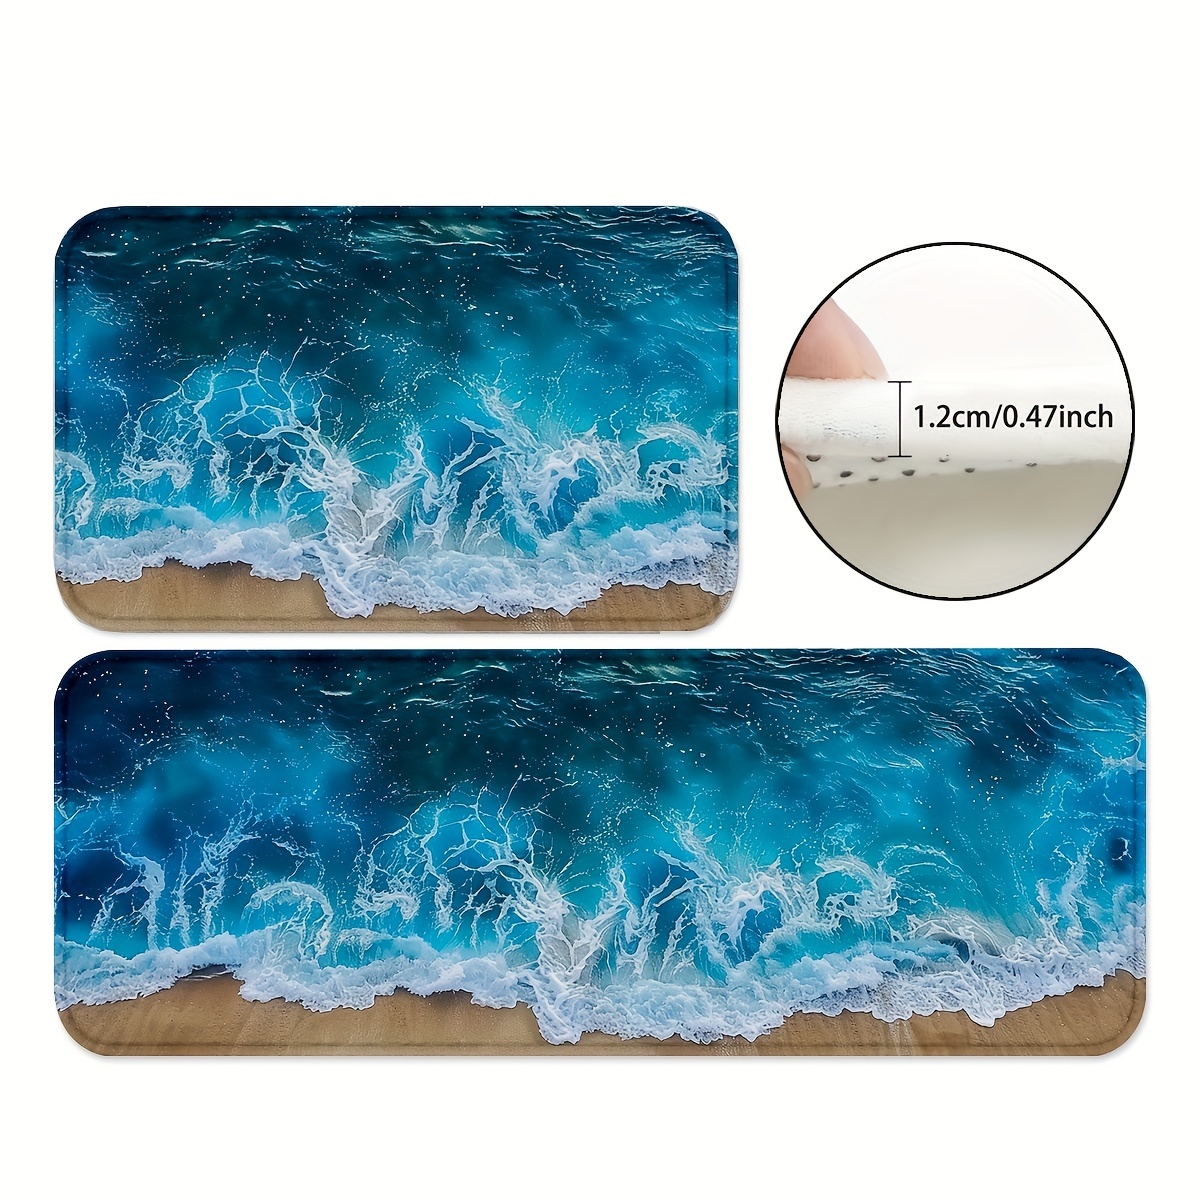 

Ocean Wave Kitchen Rugs - Polyester Design With Non-slip Backing, Machine Washable, Water Absorbent Mats For Bathroom, Playroom, Dining Area - 1.2cm Thick